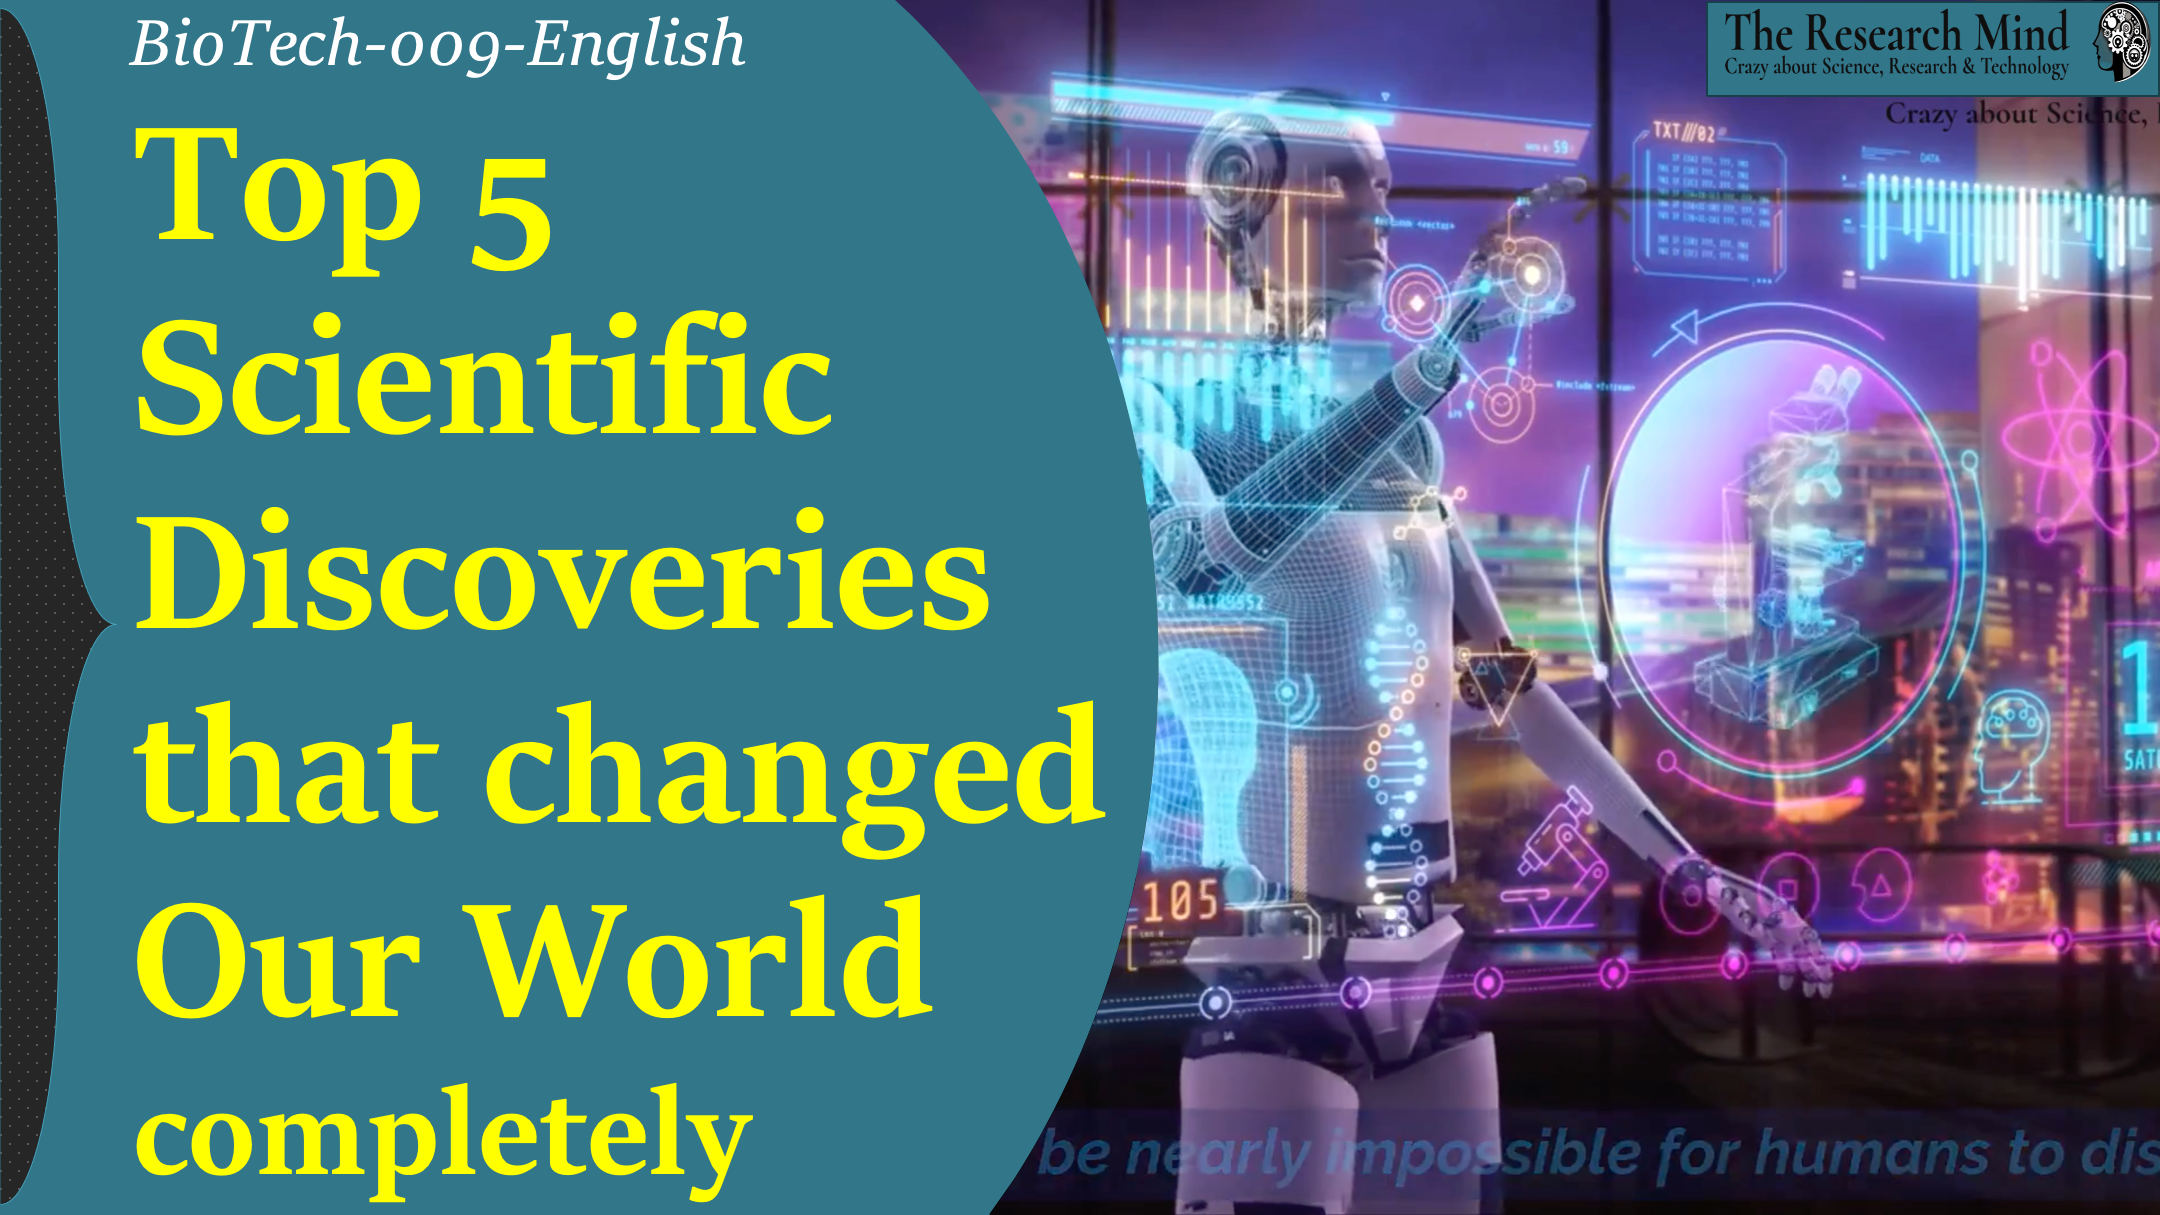 Top 5 Scientific Discoveries That Shaped our World